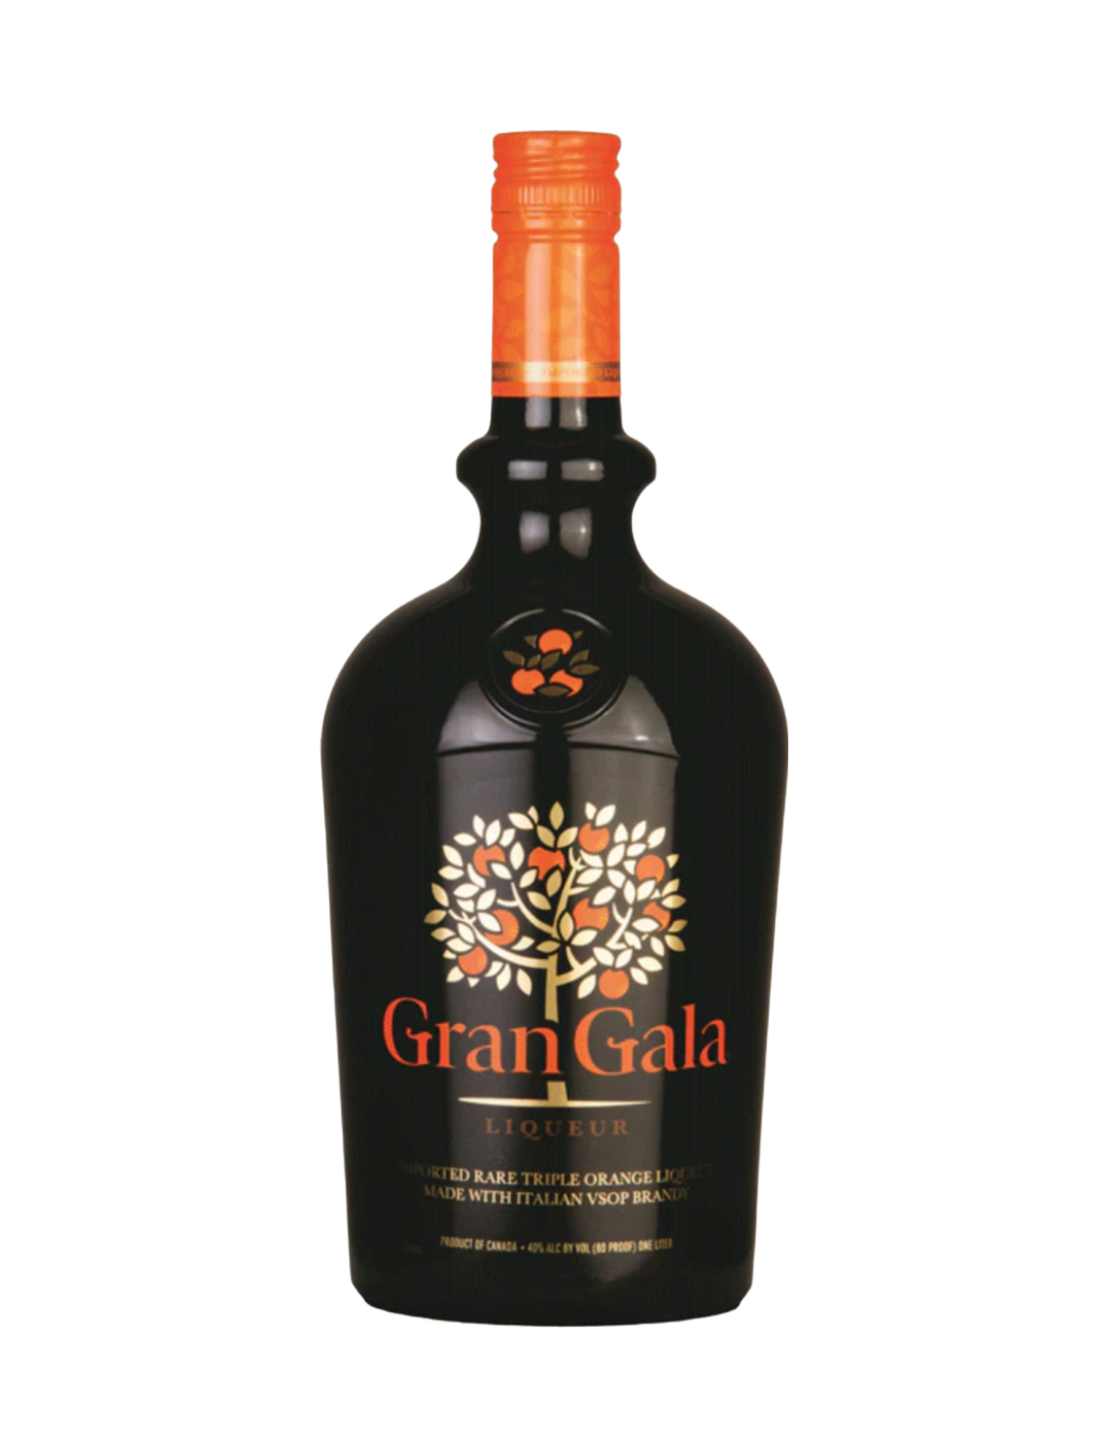 Sophisticated Gran Gala bottle, encapsulating the fusion of Italian brandy, French Cognac, and lively orange flavors.